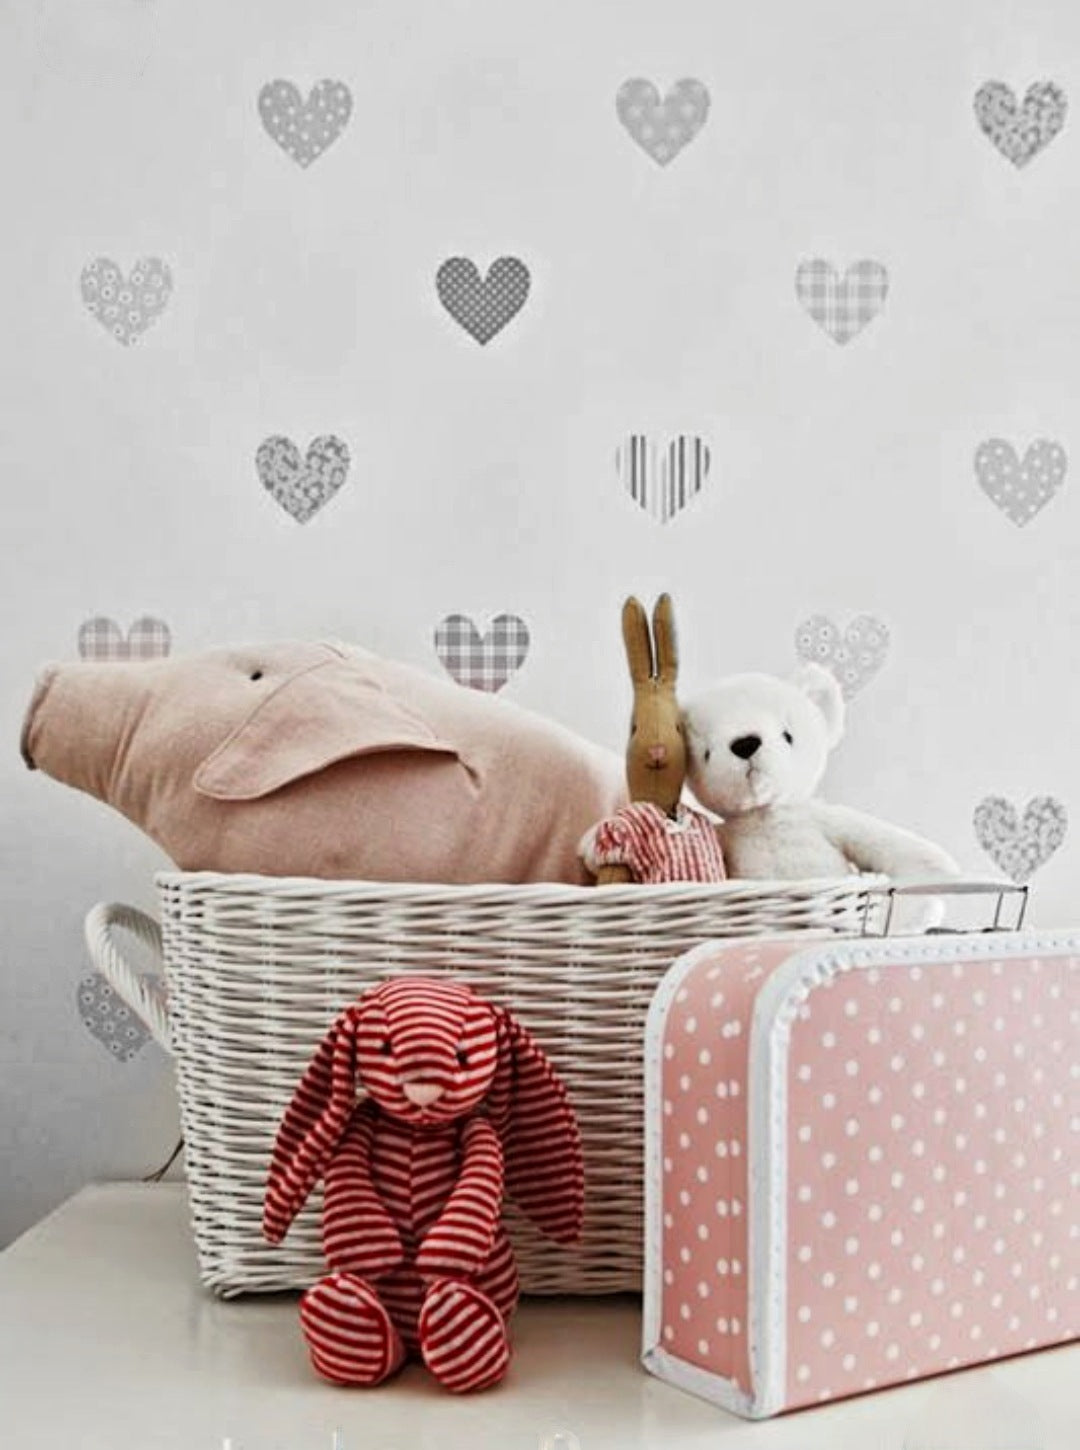 Grey Heart Detail Wall Paper Stickers - Decor